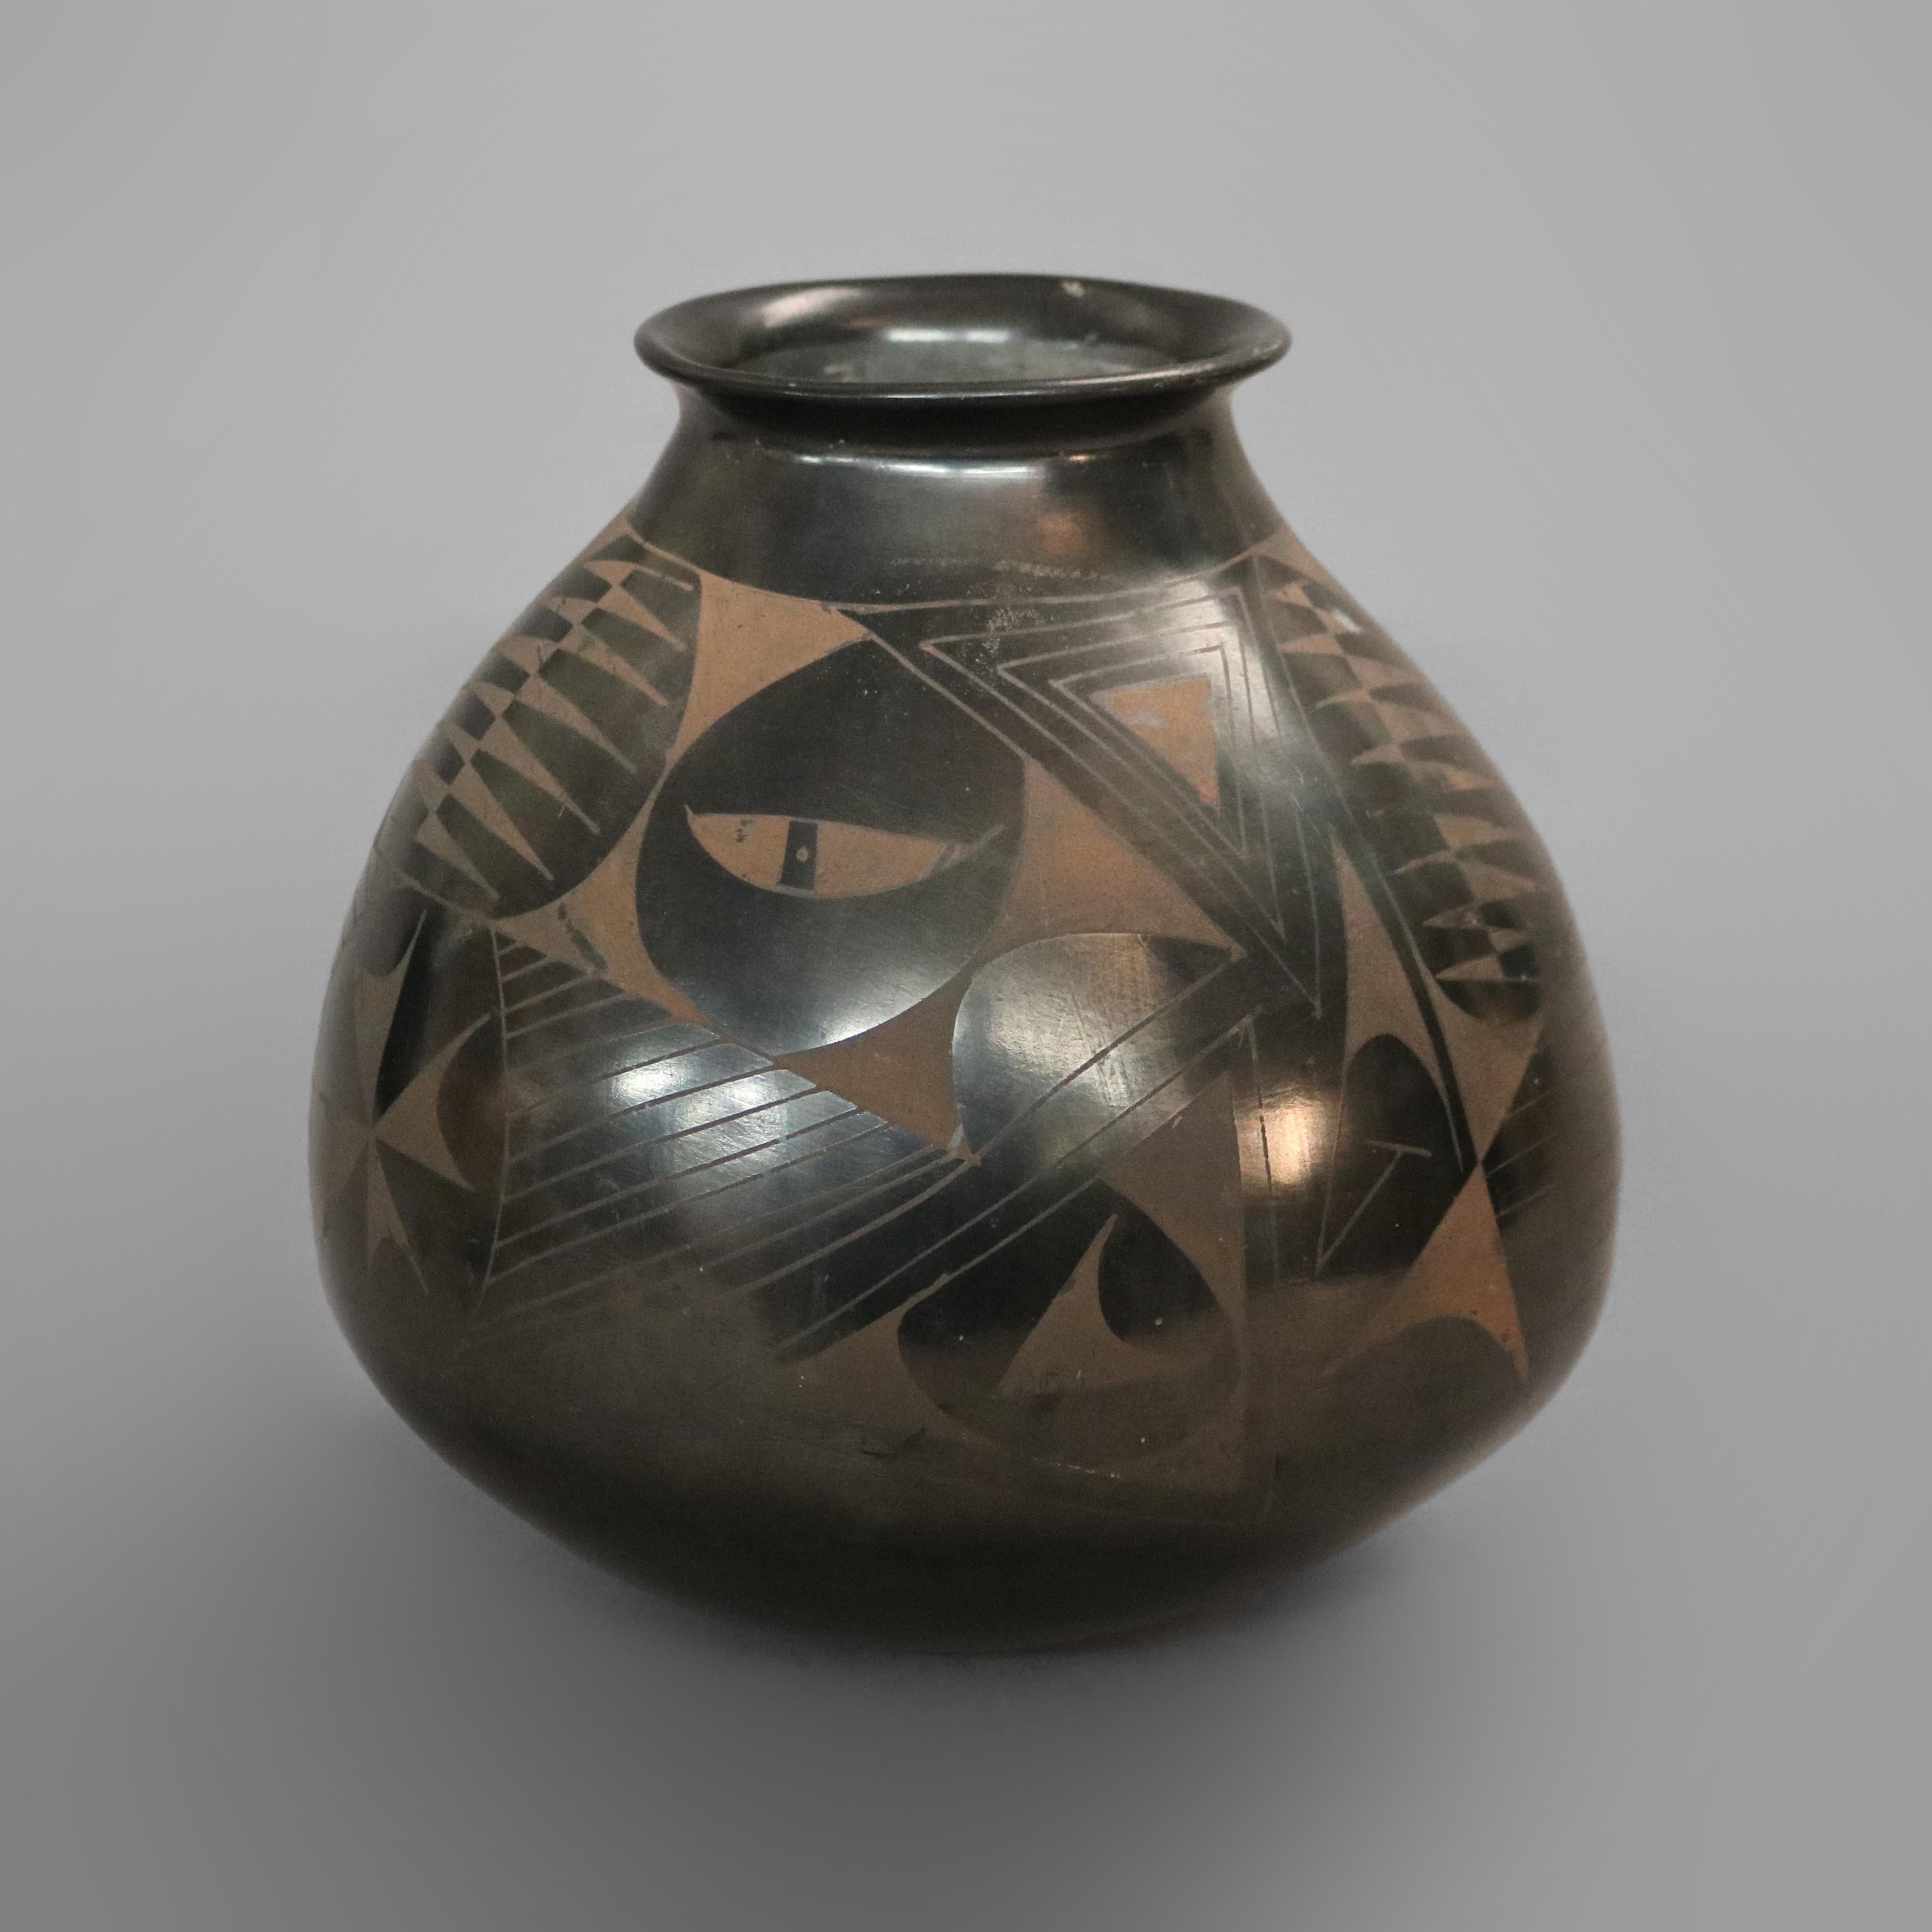 A southwestern Native American art pottery vase in the manner of Maria Martinez of San Ildefonso Pueblo by Juan L’été offers black on black with stylized foliate design throughout, artist signed, circa 1930

Measures - 10.25''H x 9.75''W x 9.75''D.